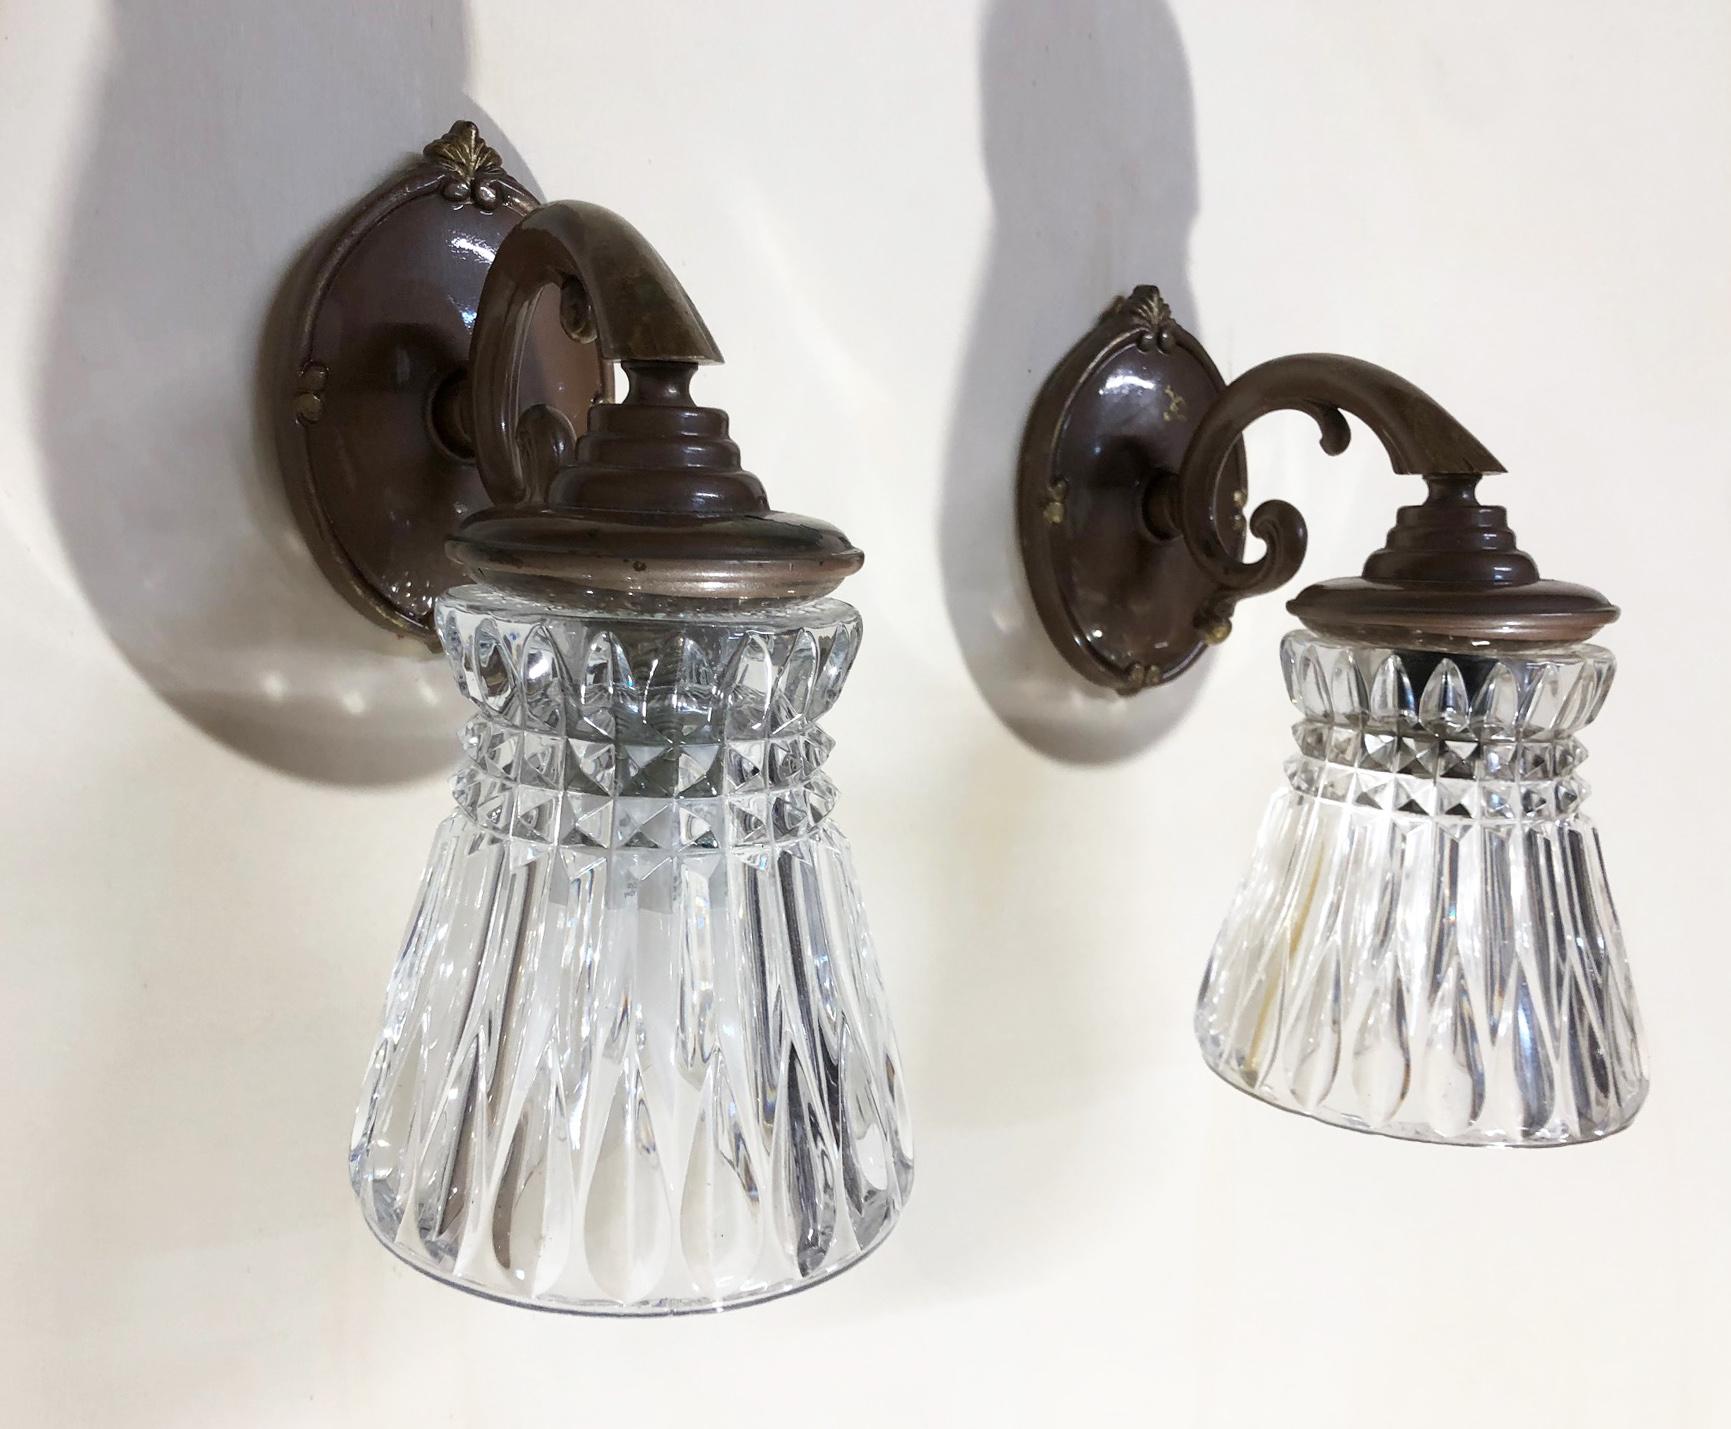 Pair of original 1970 Italian brass wall lamps, bronzed color. Original glass
They can also be installed upside down.
In working condition.
Equipped with original 20th century European wiring.
We recommend buyer consults an experienced